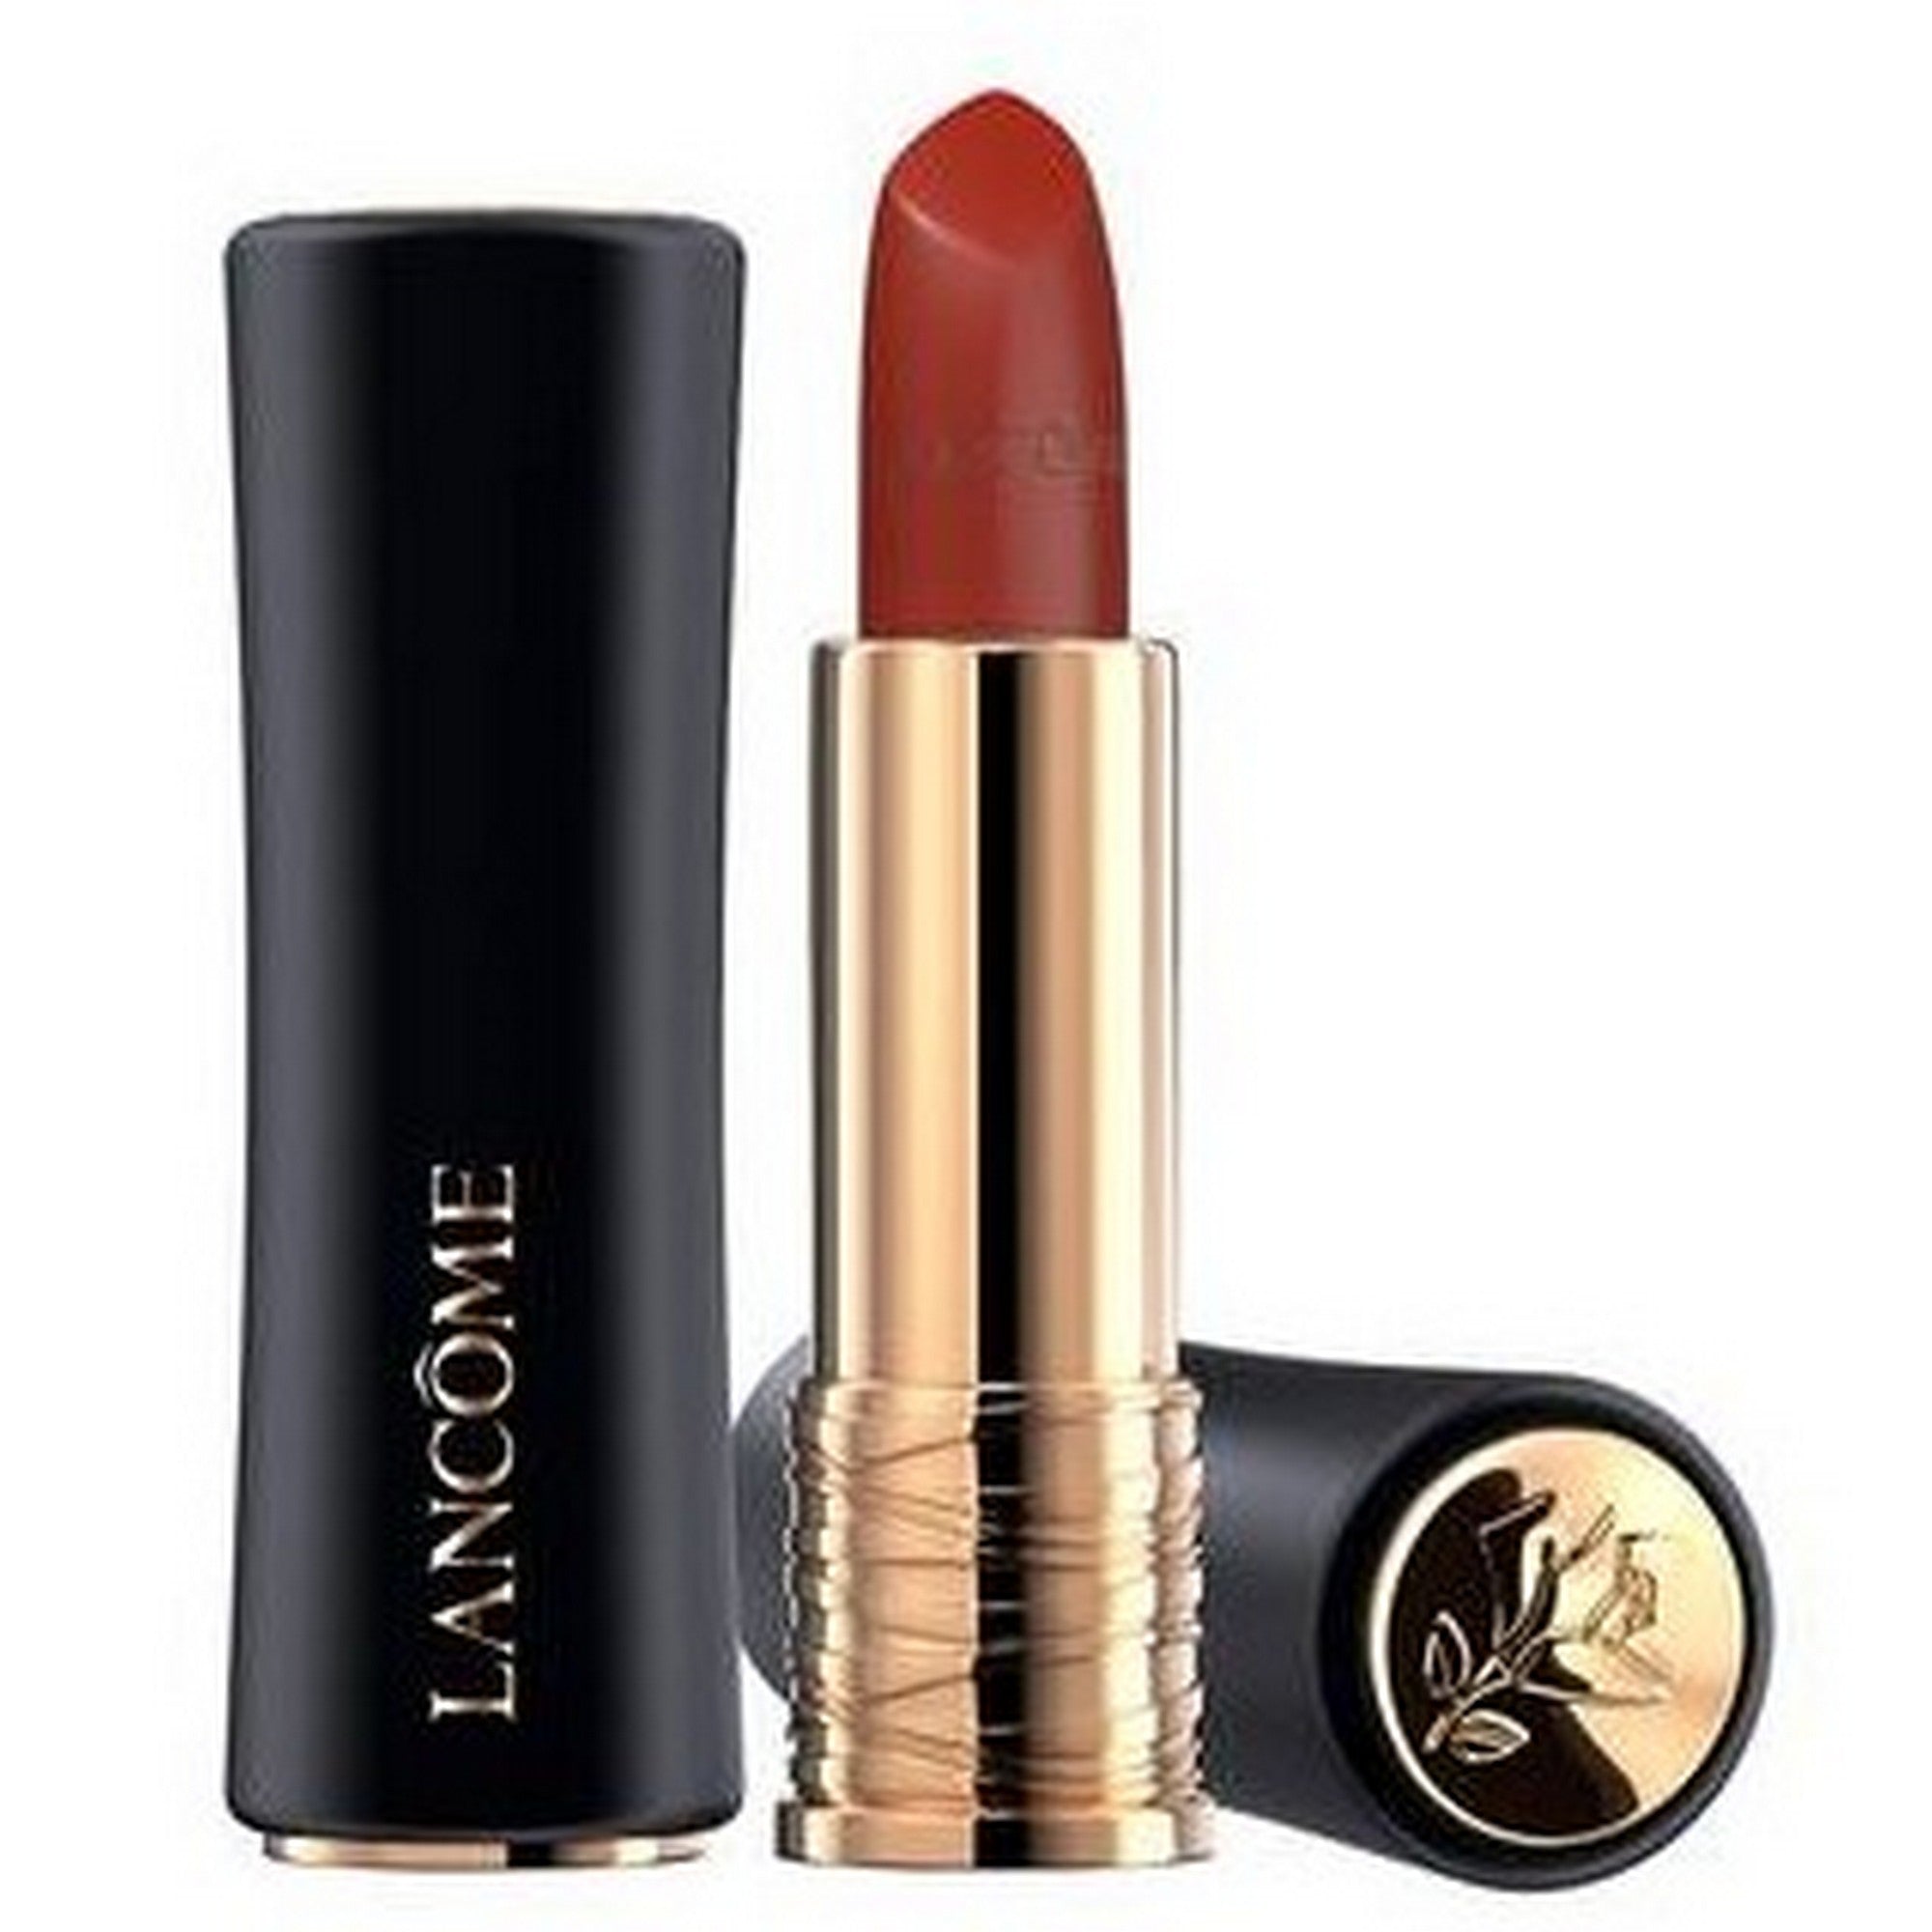 Lancome Absolu Rouge Cream Lipstick French Touch